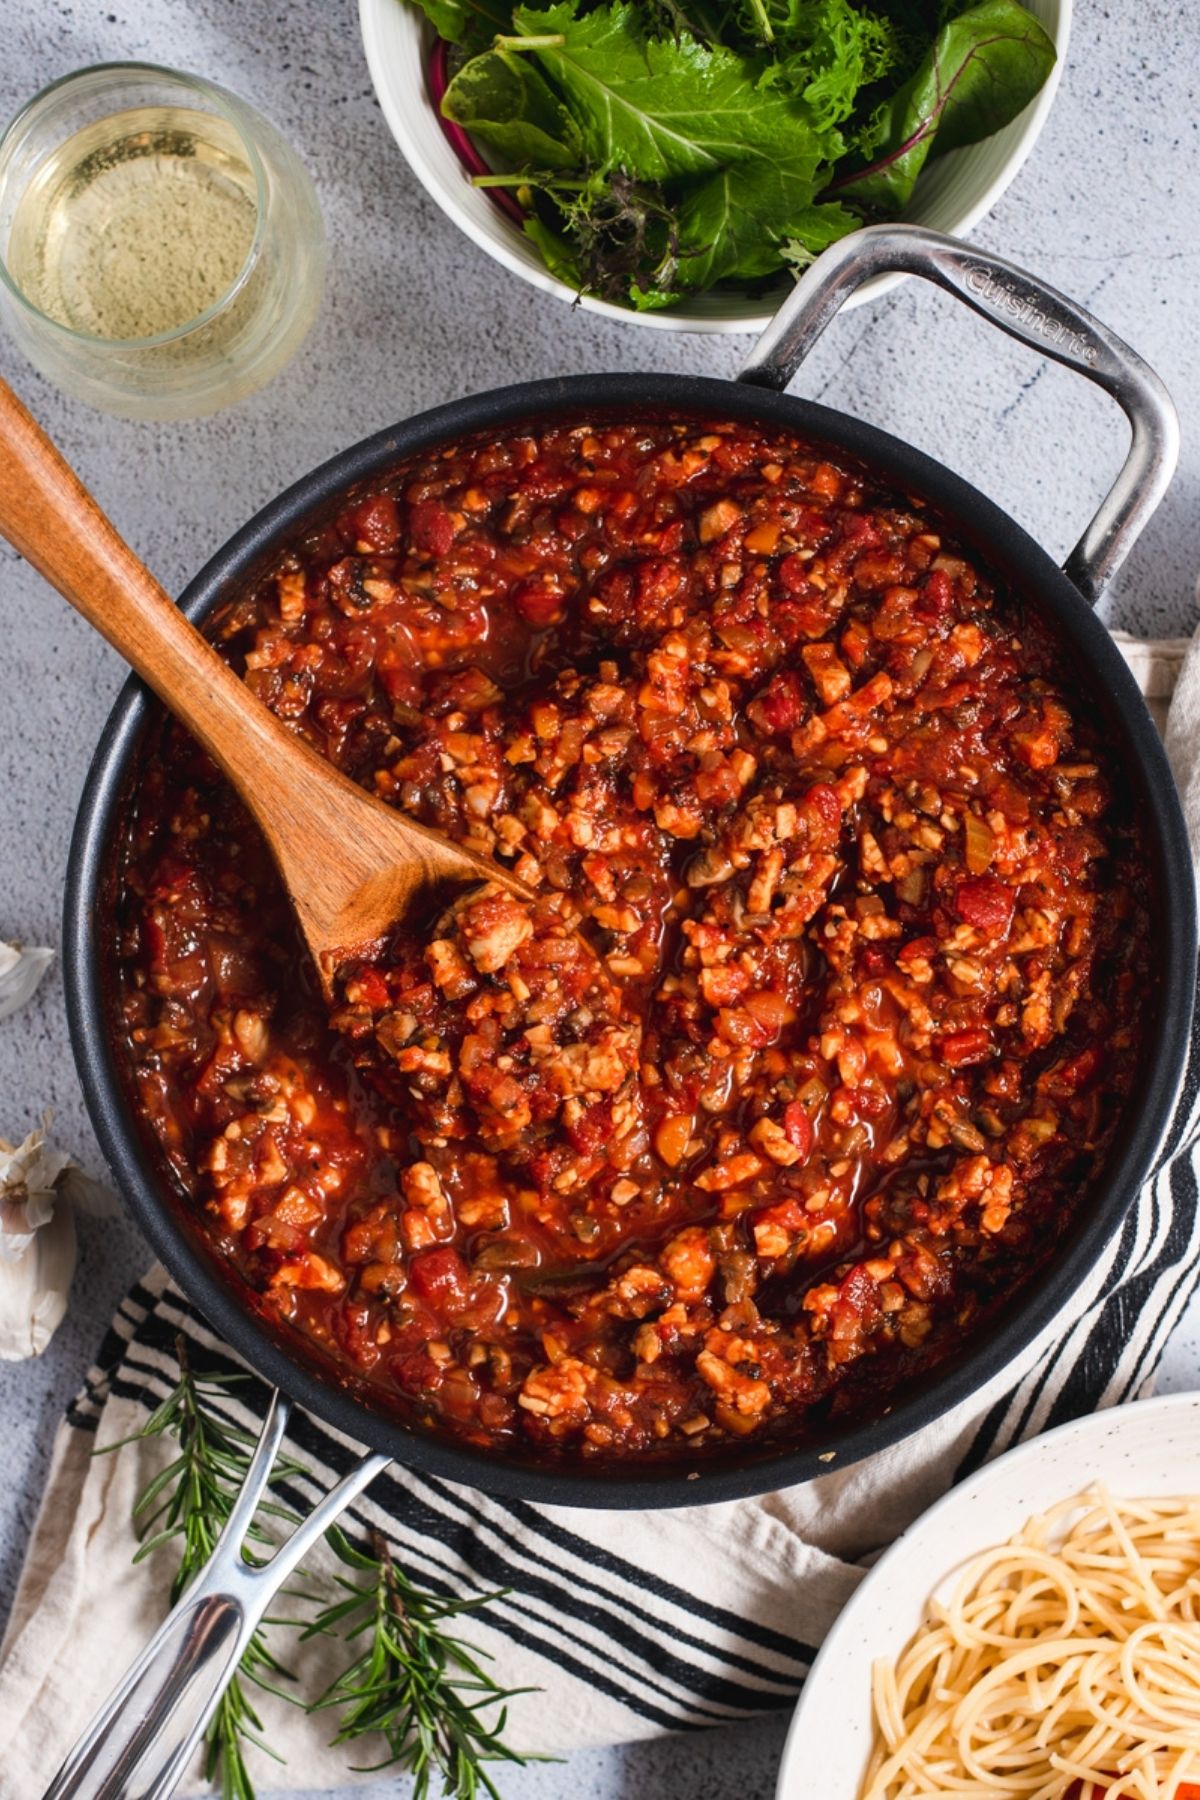 Tempeh Bolognese sauce in a large black skillet with a wooden spoon.